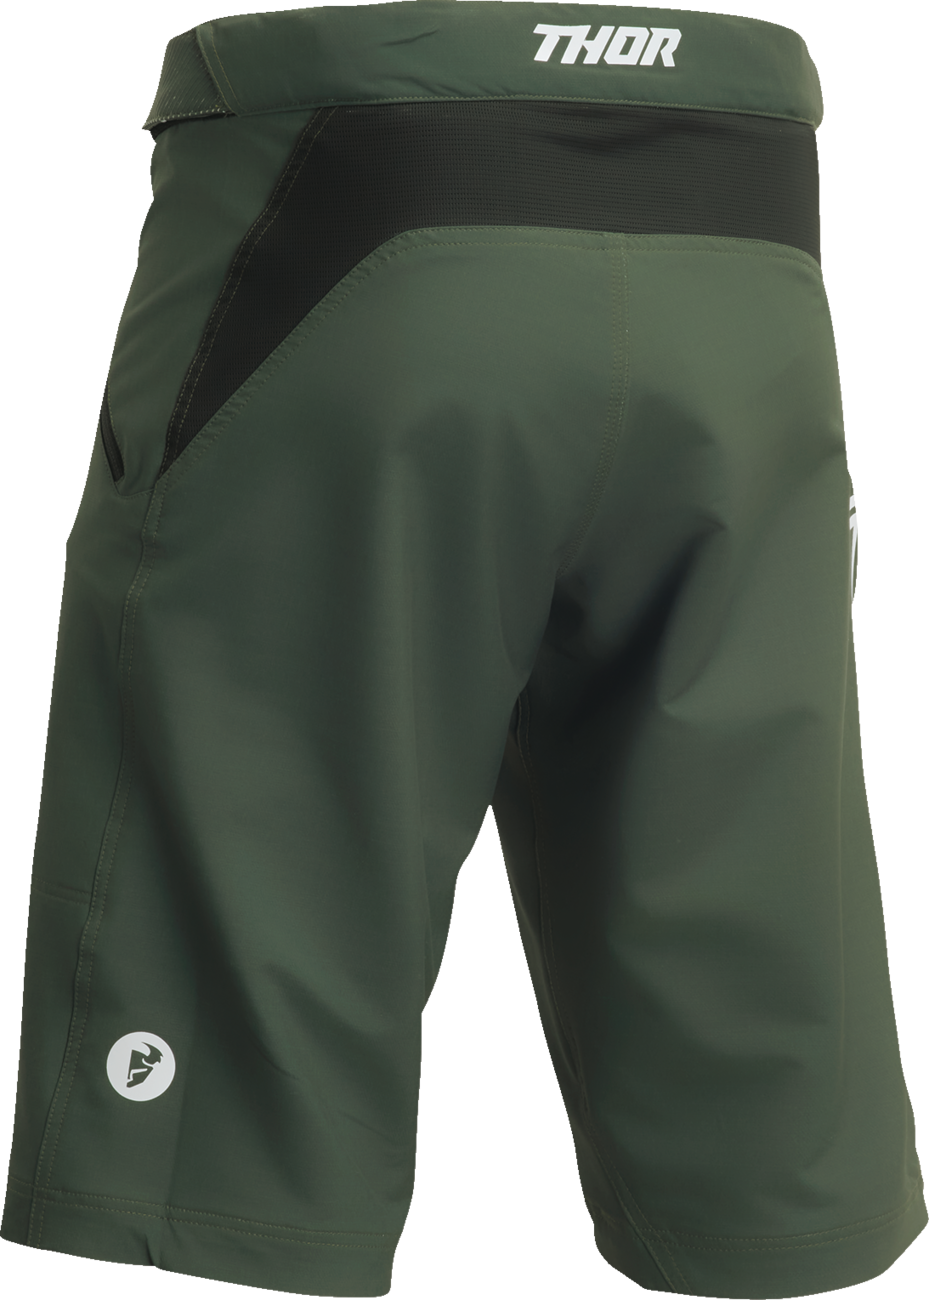 THOR Intense Shorts - Forest Green - US 34 5001-0291